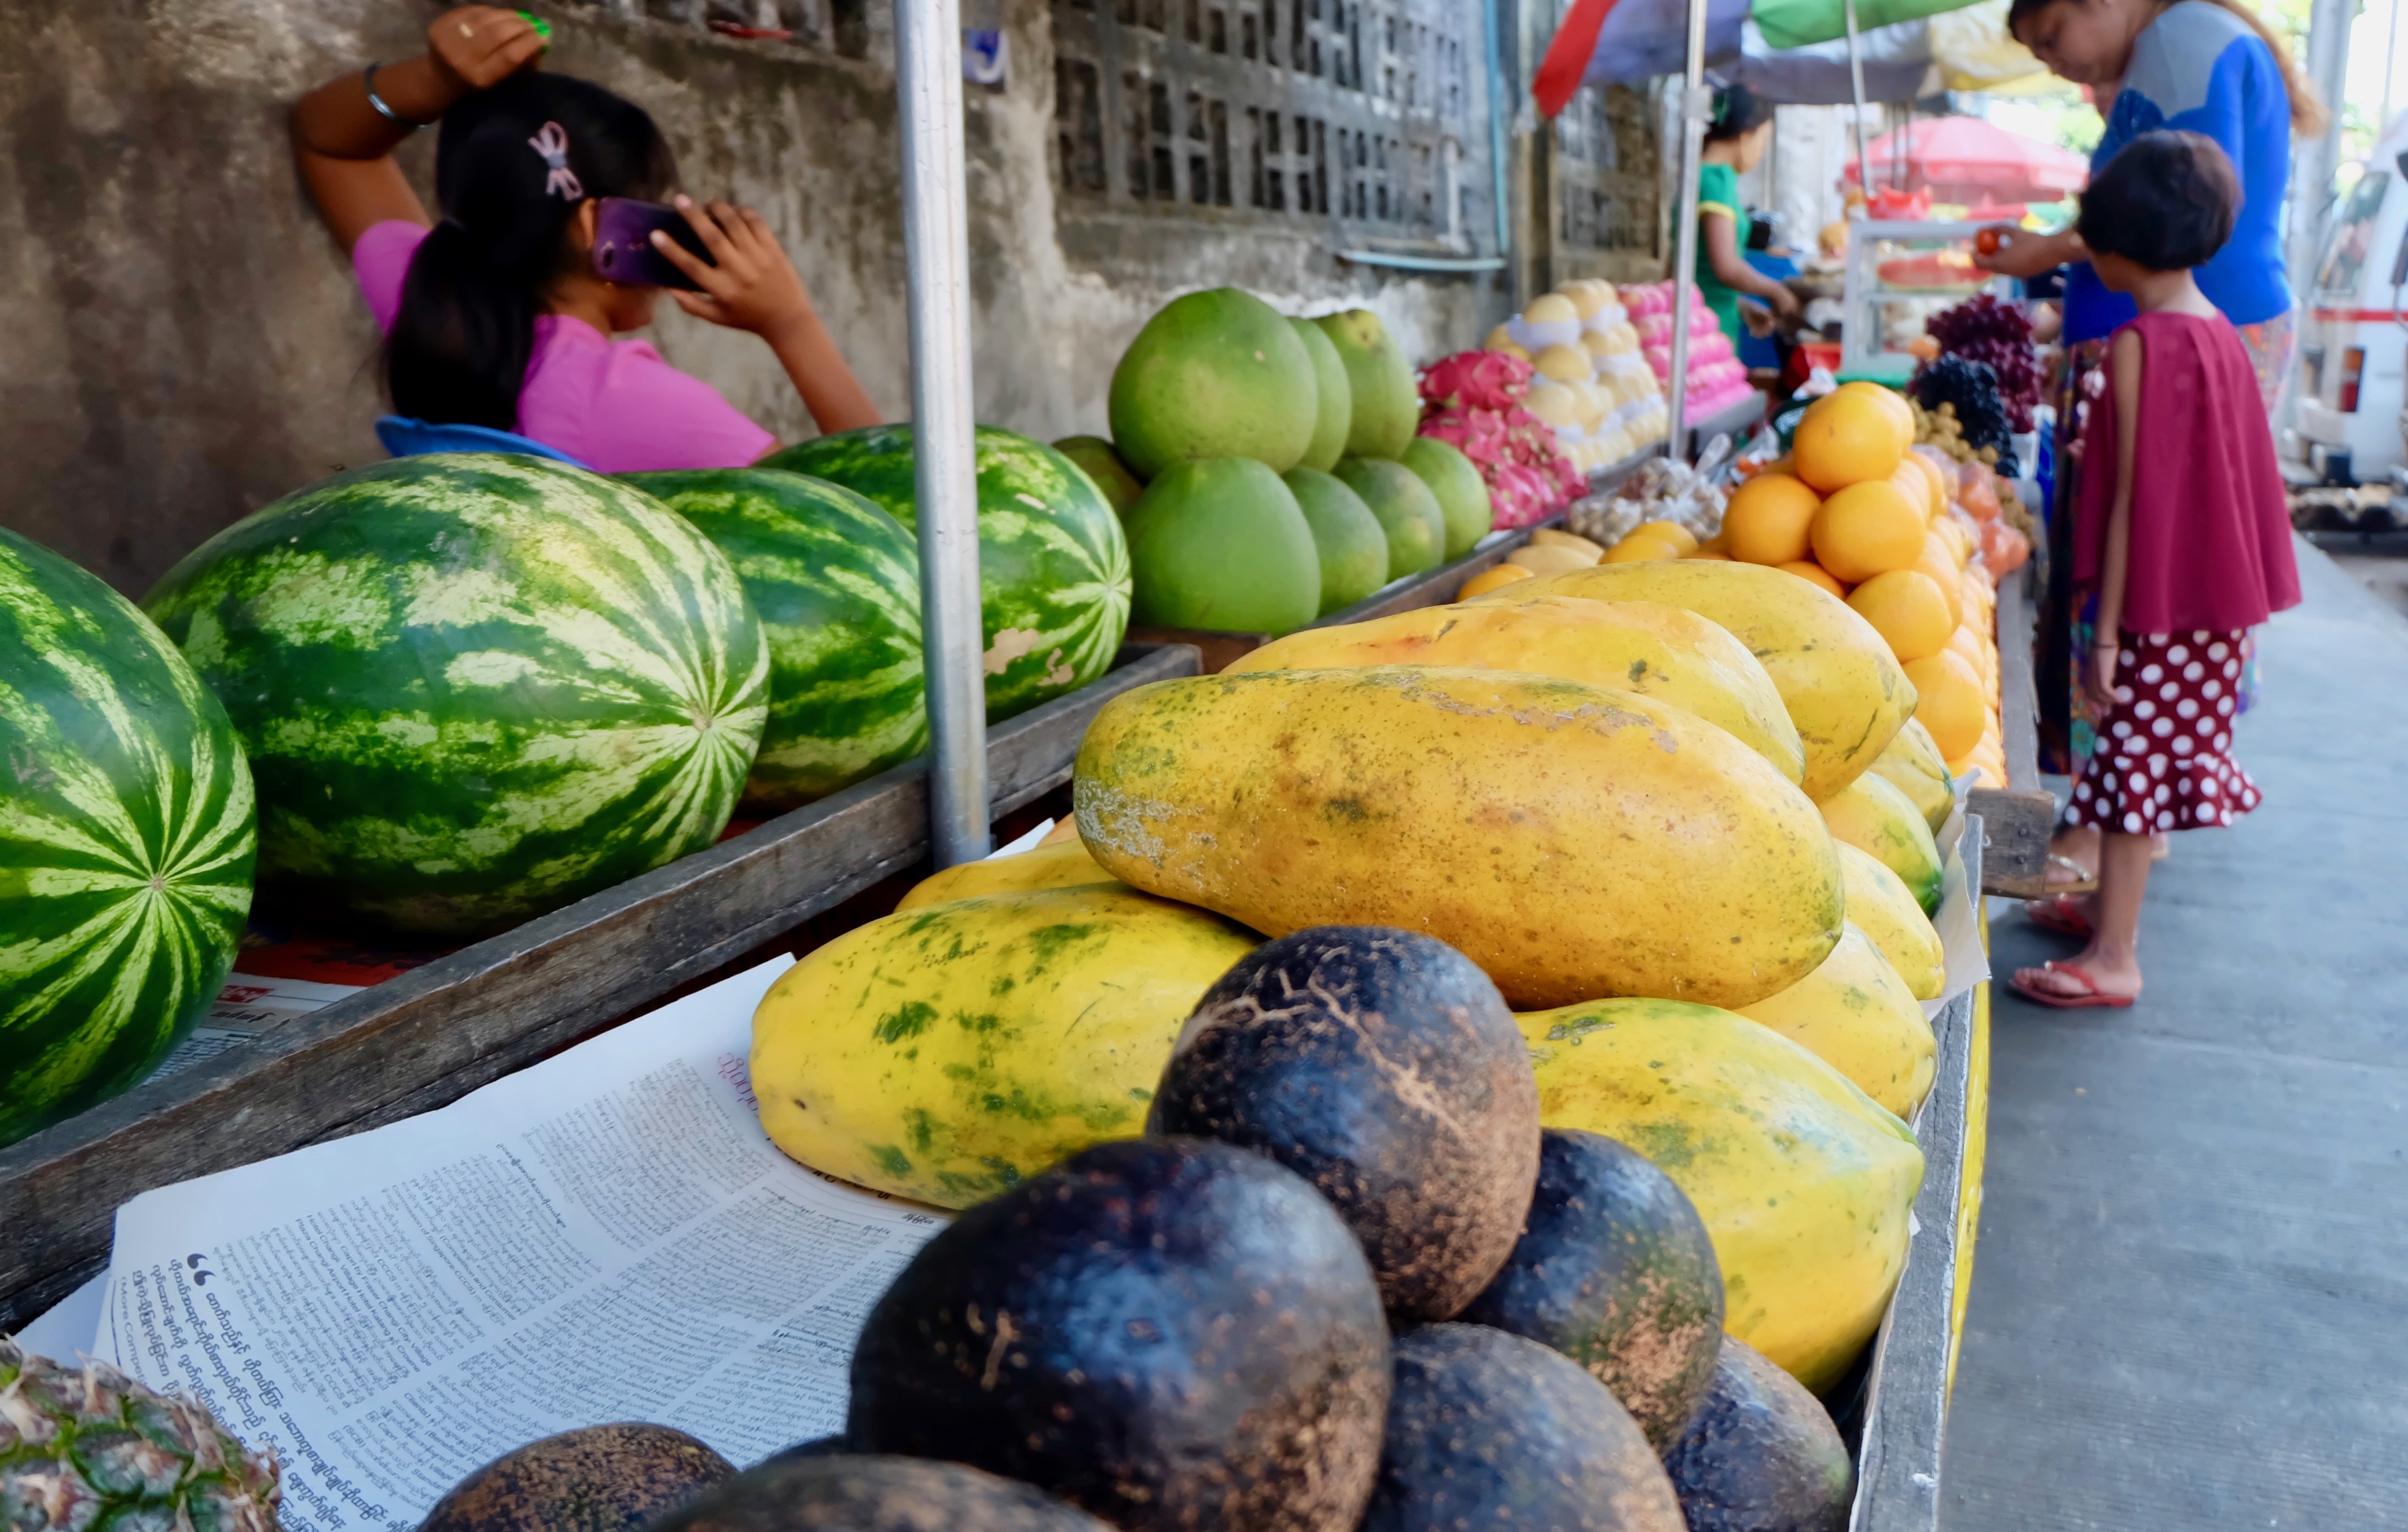 A fruit stand in downtown Yangon. (Photos by Myanmar Mix)